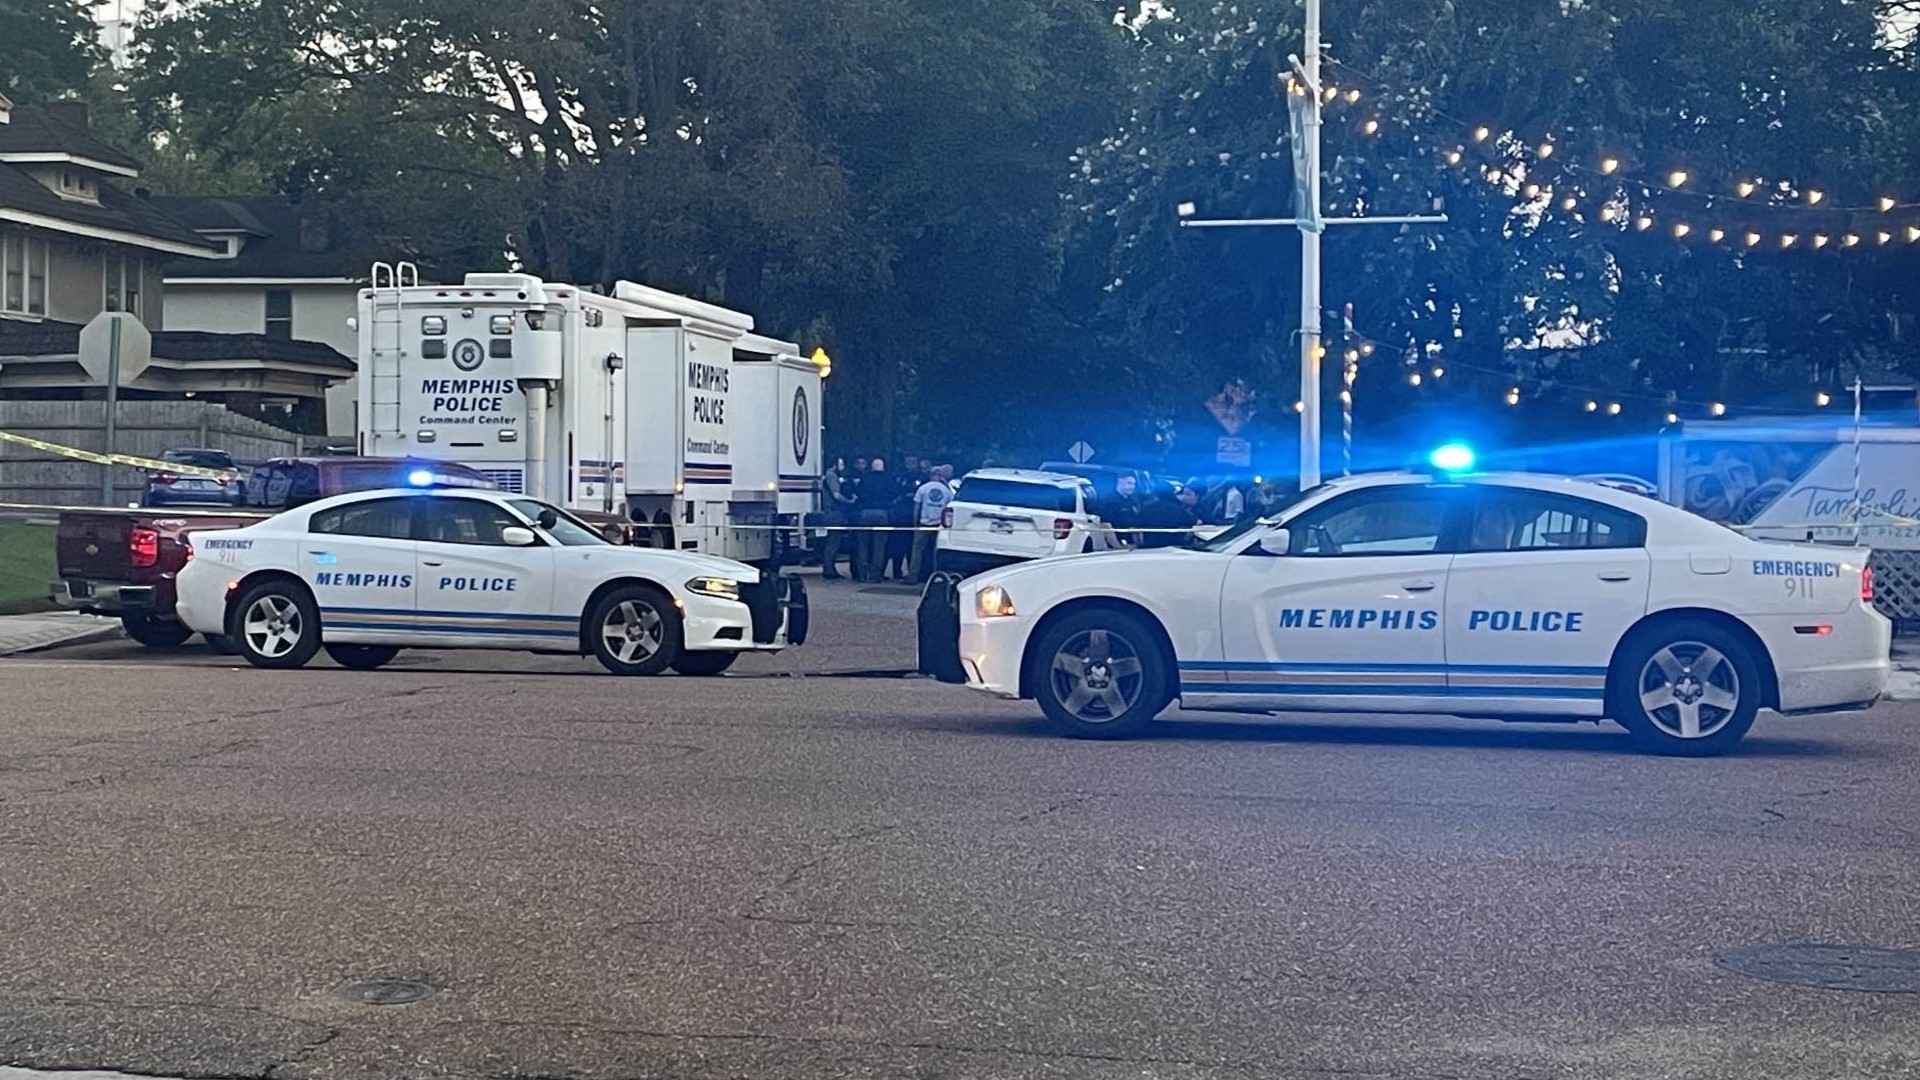 The man who died in MPD custody after an incident in Midtown has been identified by the TBI as 19-year-old Courtney Ross.